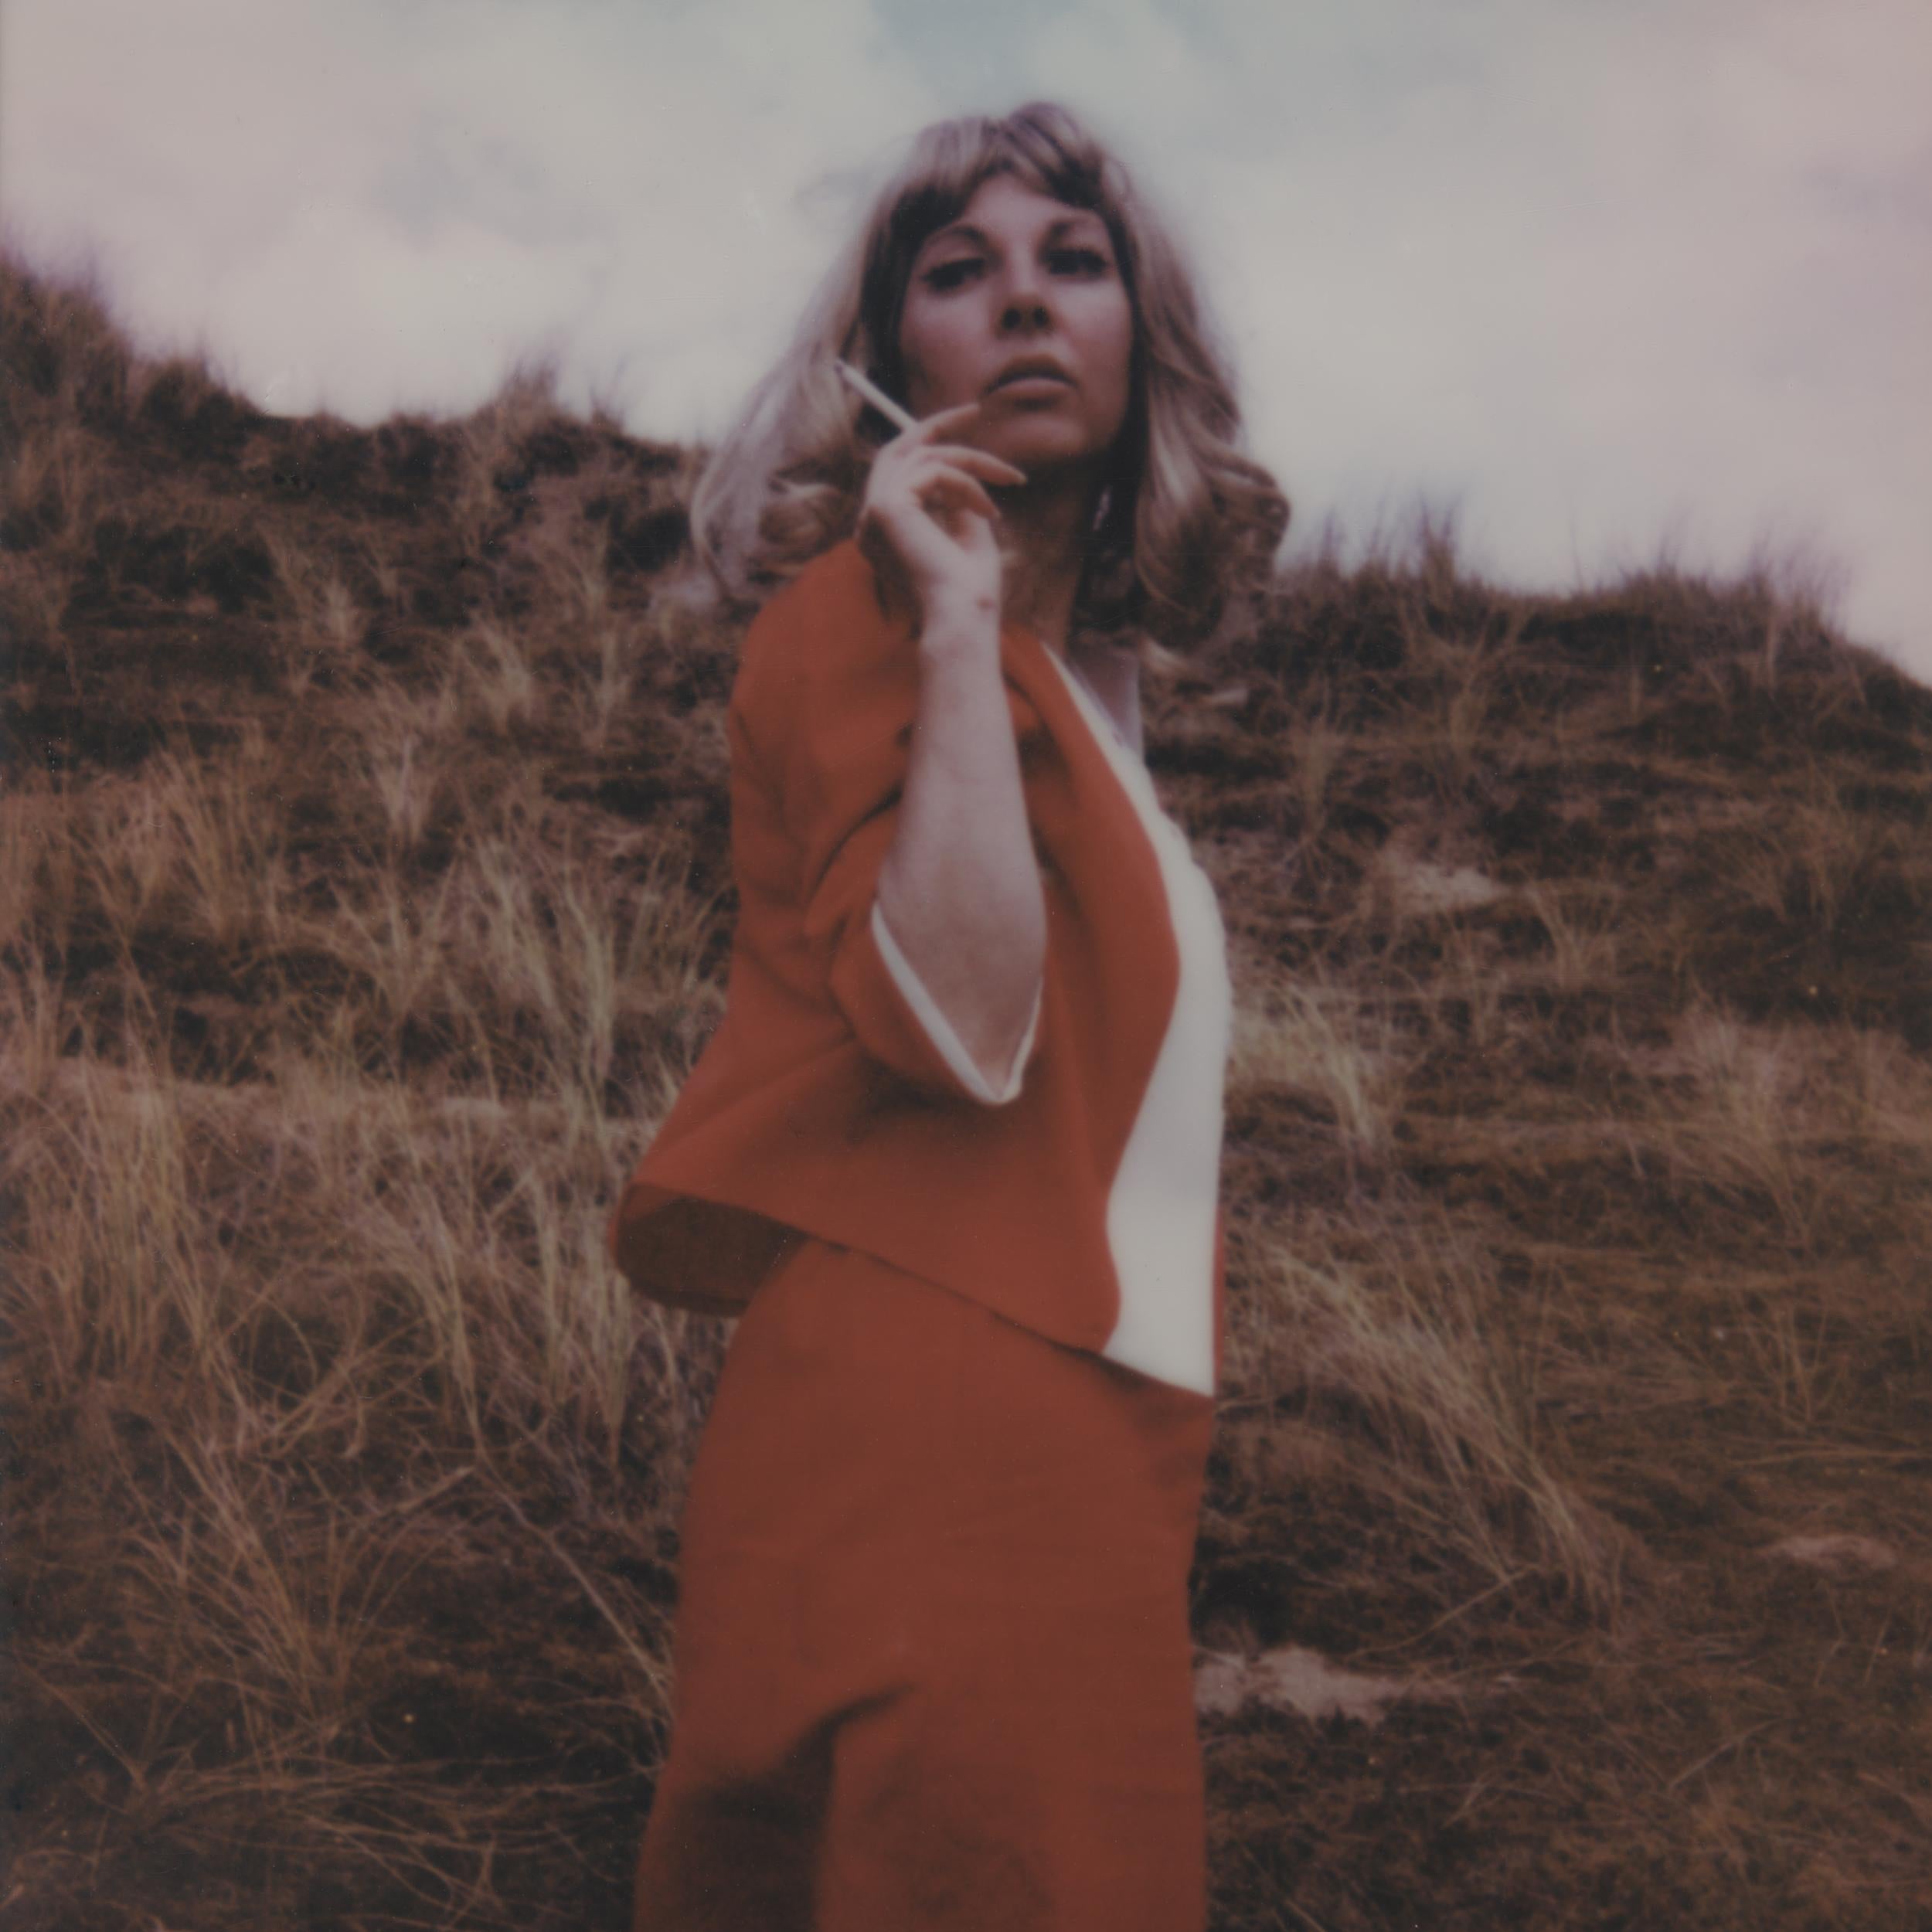 Clare Marie Bailey Color Photograph - Heart Stopped (at 3pm) - Contemporary, Polaroid, Woman, 21st Century